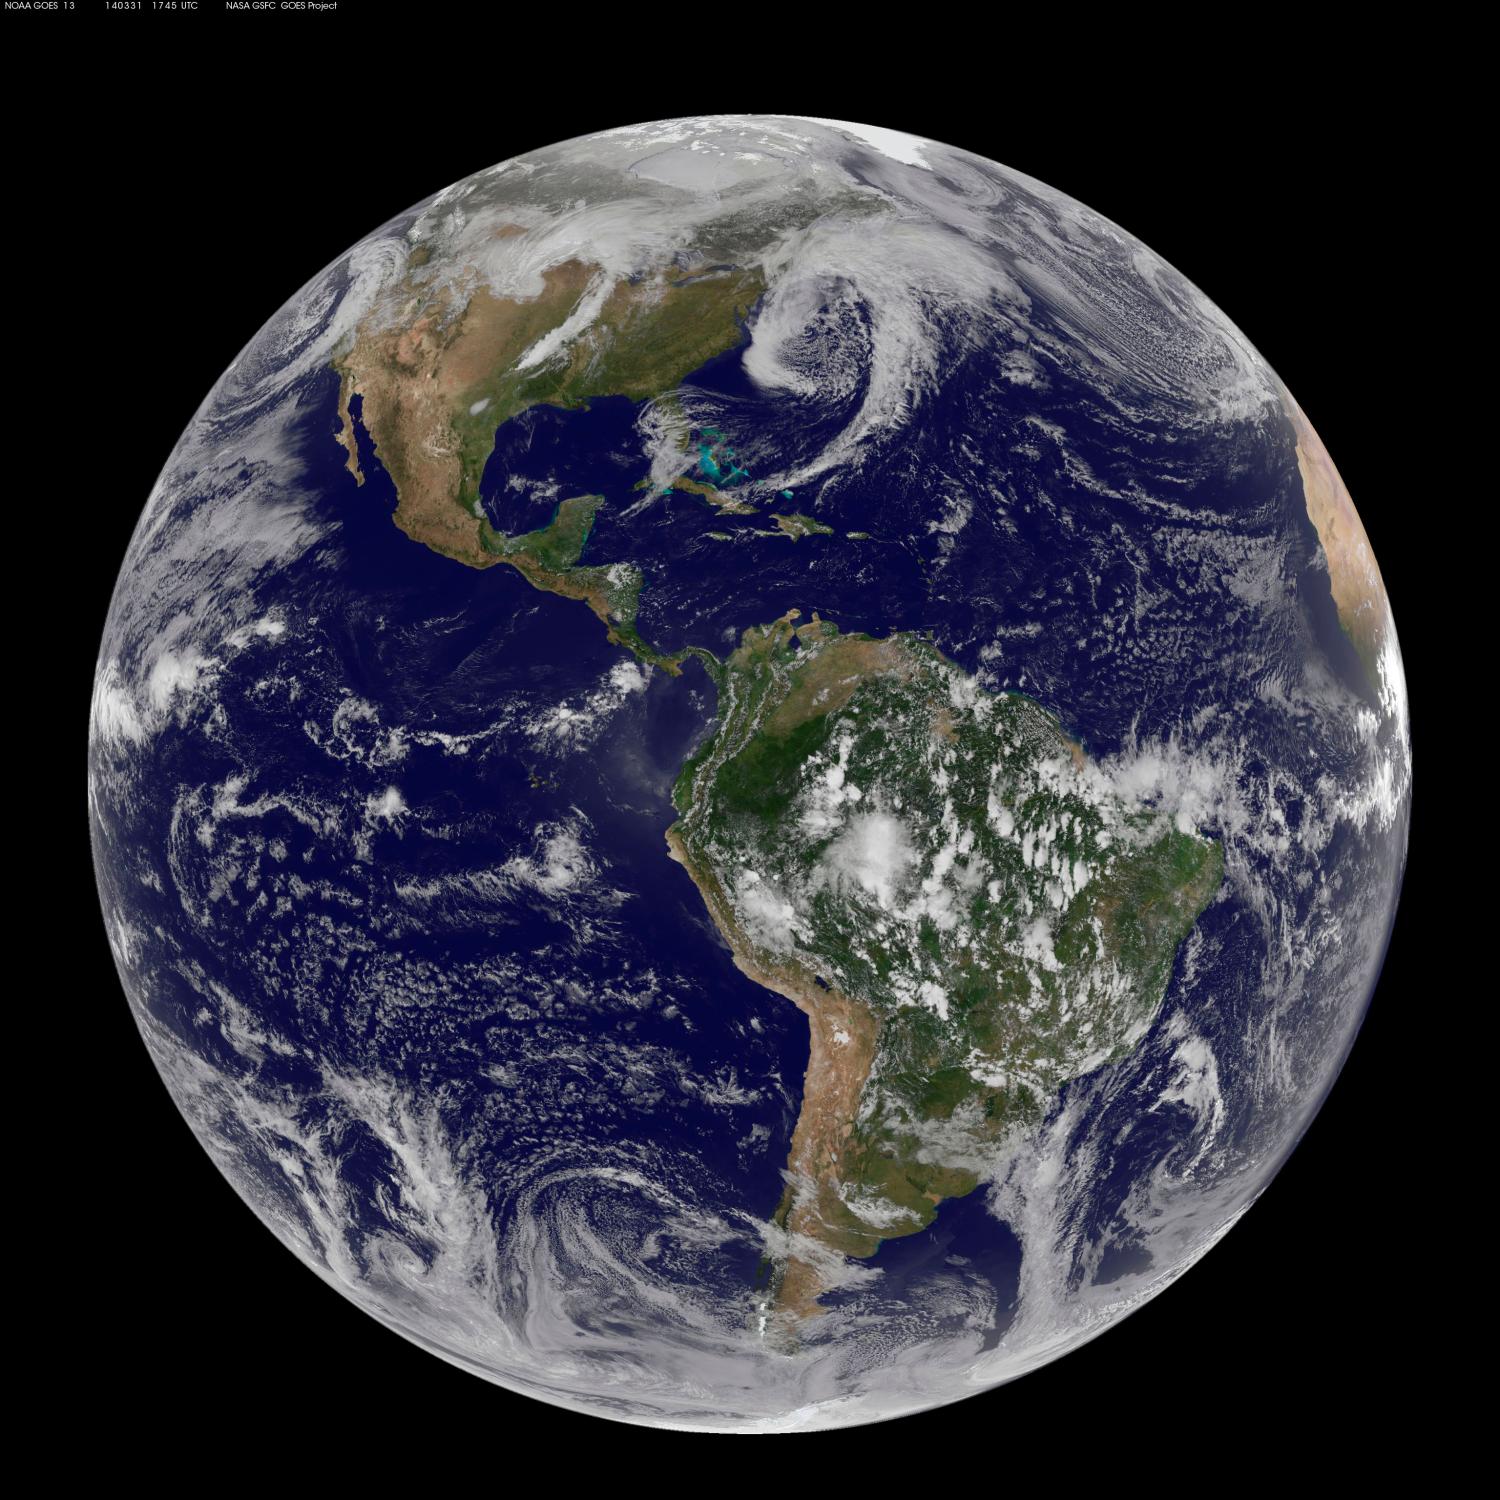 NOAA's GOES-13 and GOES-15 satellite image from March 31, 2014 and released on April 1, 2014 shows the low pressure systems in the eastern Pacific Ocean, over the United States' Heartland, and in the eastern Atlantic Ocean. All three lows have the signature comma shape that make them appear to be curled up dragons. REUTERS/NASA/Handout via Reuters (OUTER SPACE - Tags: ENVIRONMENT) ATTENTION EDITORS - THIS IMAGE WAS PROVIDED BY A THIRD PARTY. FOR EDITORIAL USE ONLY. NOT FOR SALE FOR MARKETING OR ADVERTISING CAMPAIGNS. THIS PICTURE IS DISTRIBUTED EXACTLY AS RECEIVED BY REUTERS, AS A SERVICE TO CLIENTS - GM1EA420BUW01